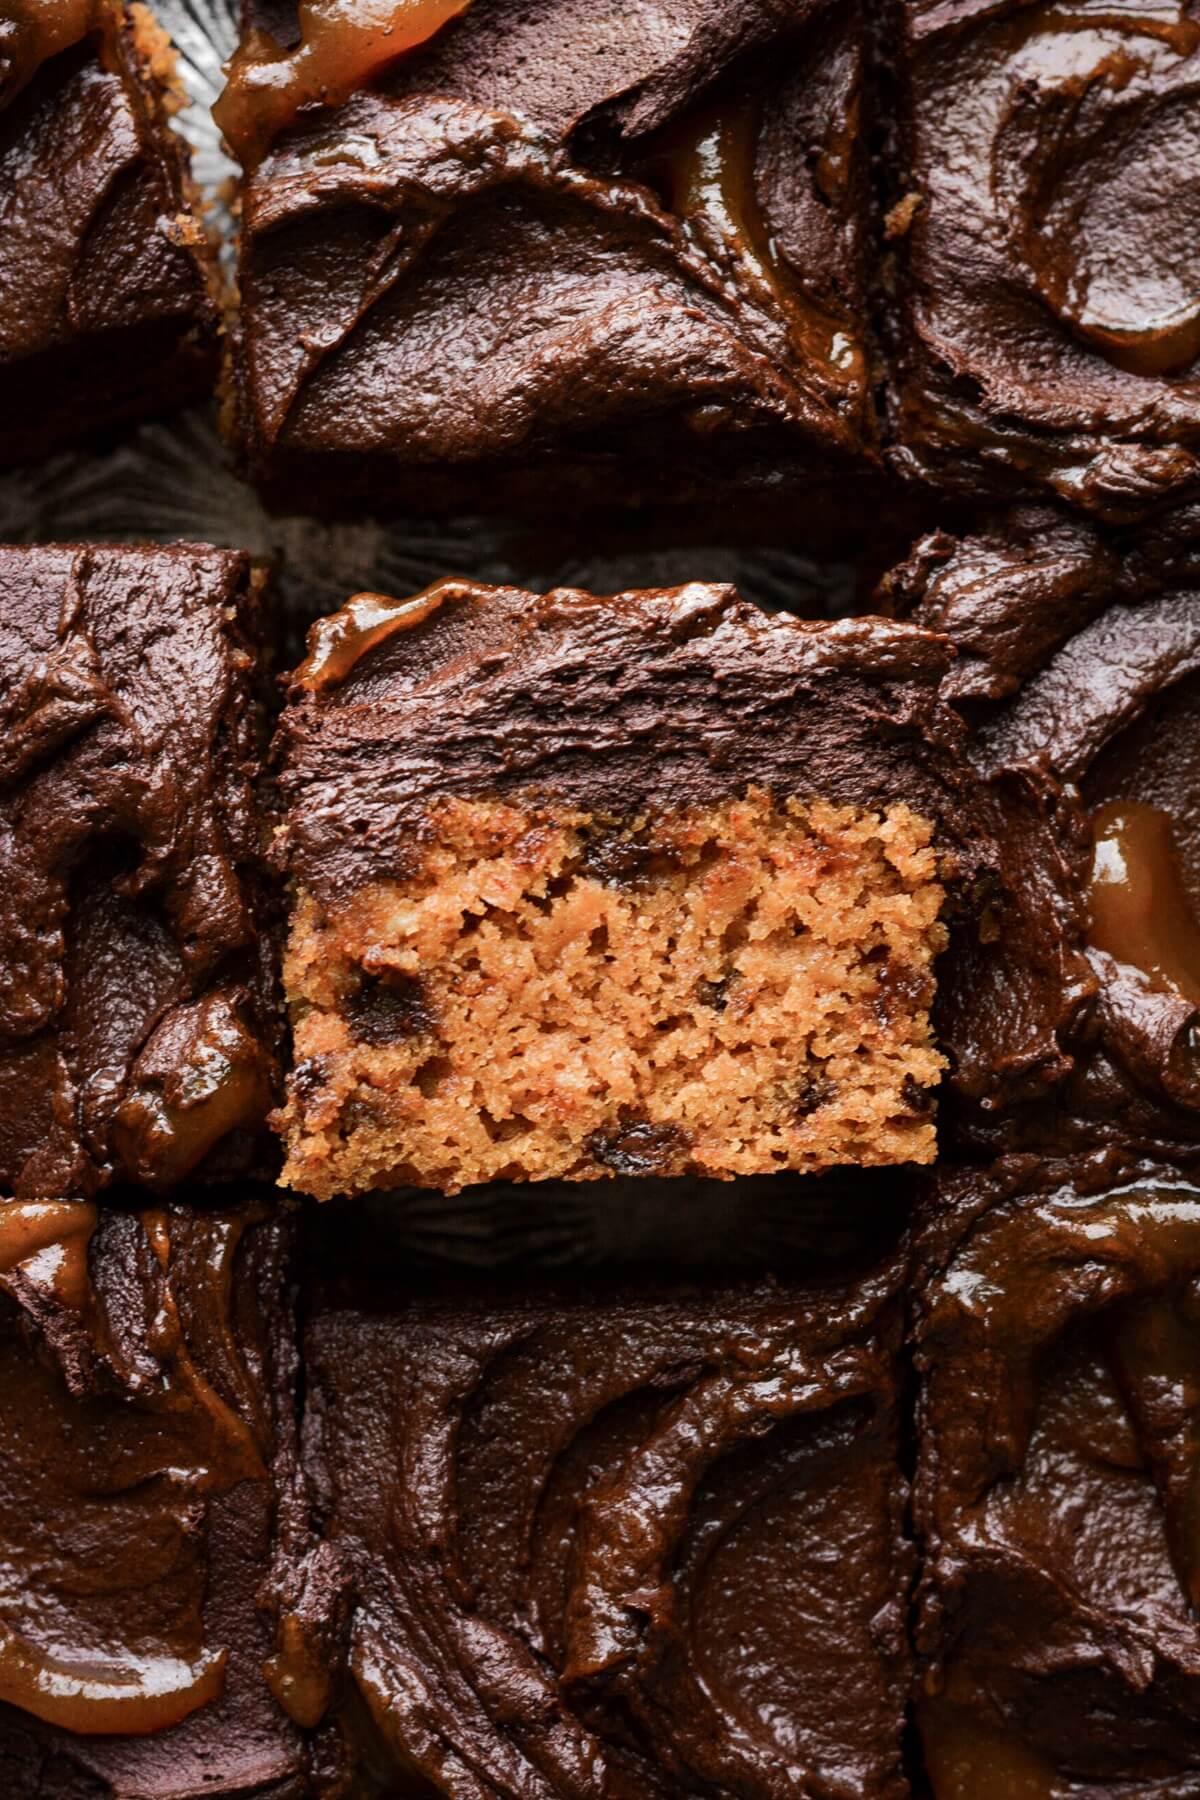 Pumpkin chocolate chip snack cake with chocolate frosting.